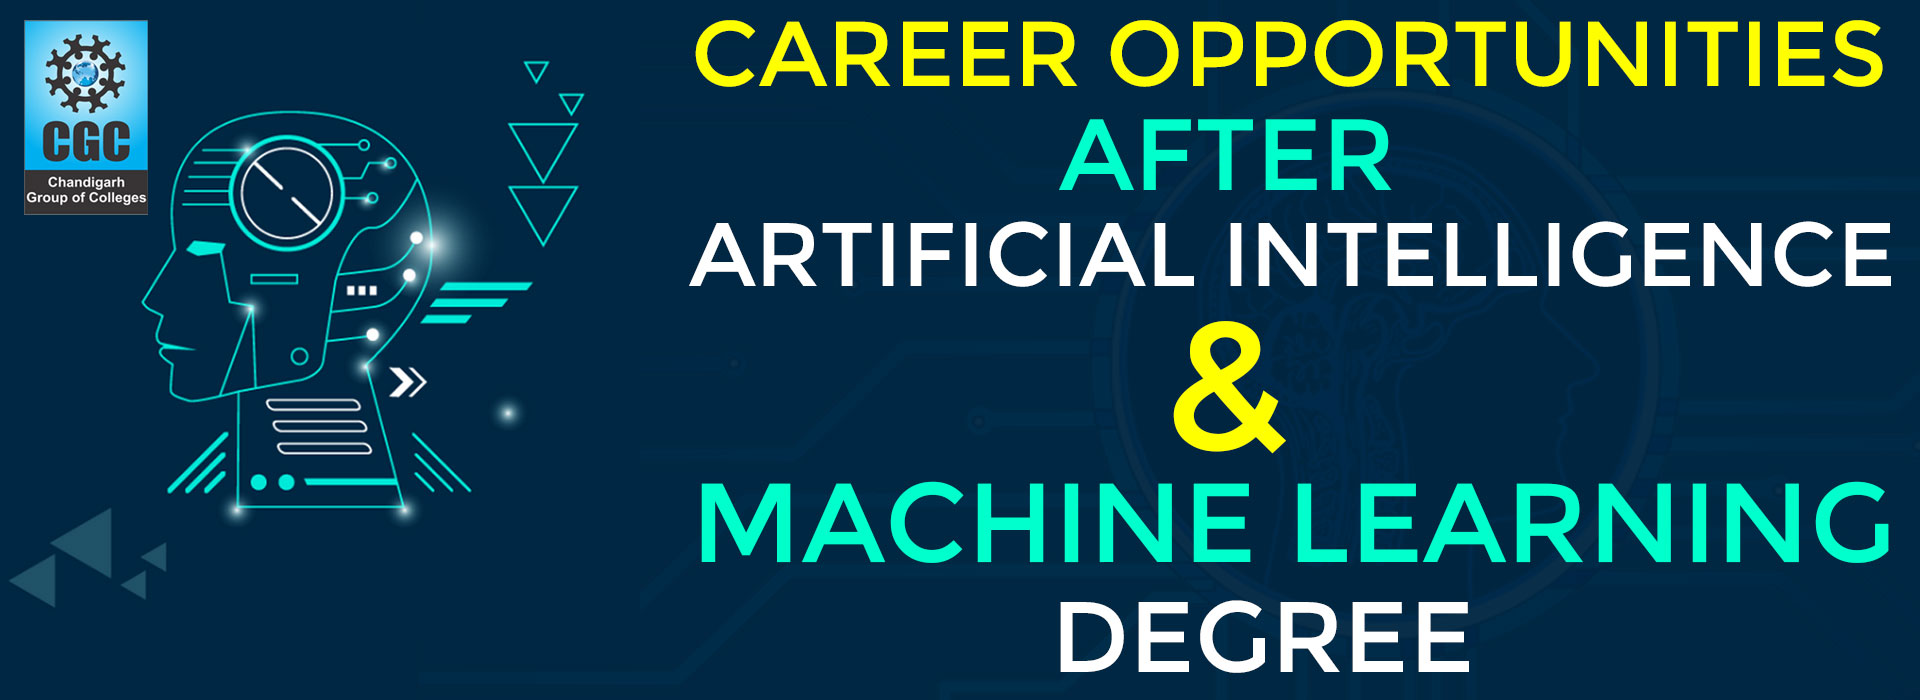 Career Opportunities after Artificial Intelligence & Machine Learning Degree 